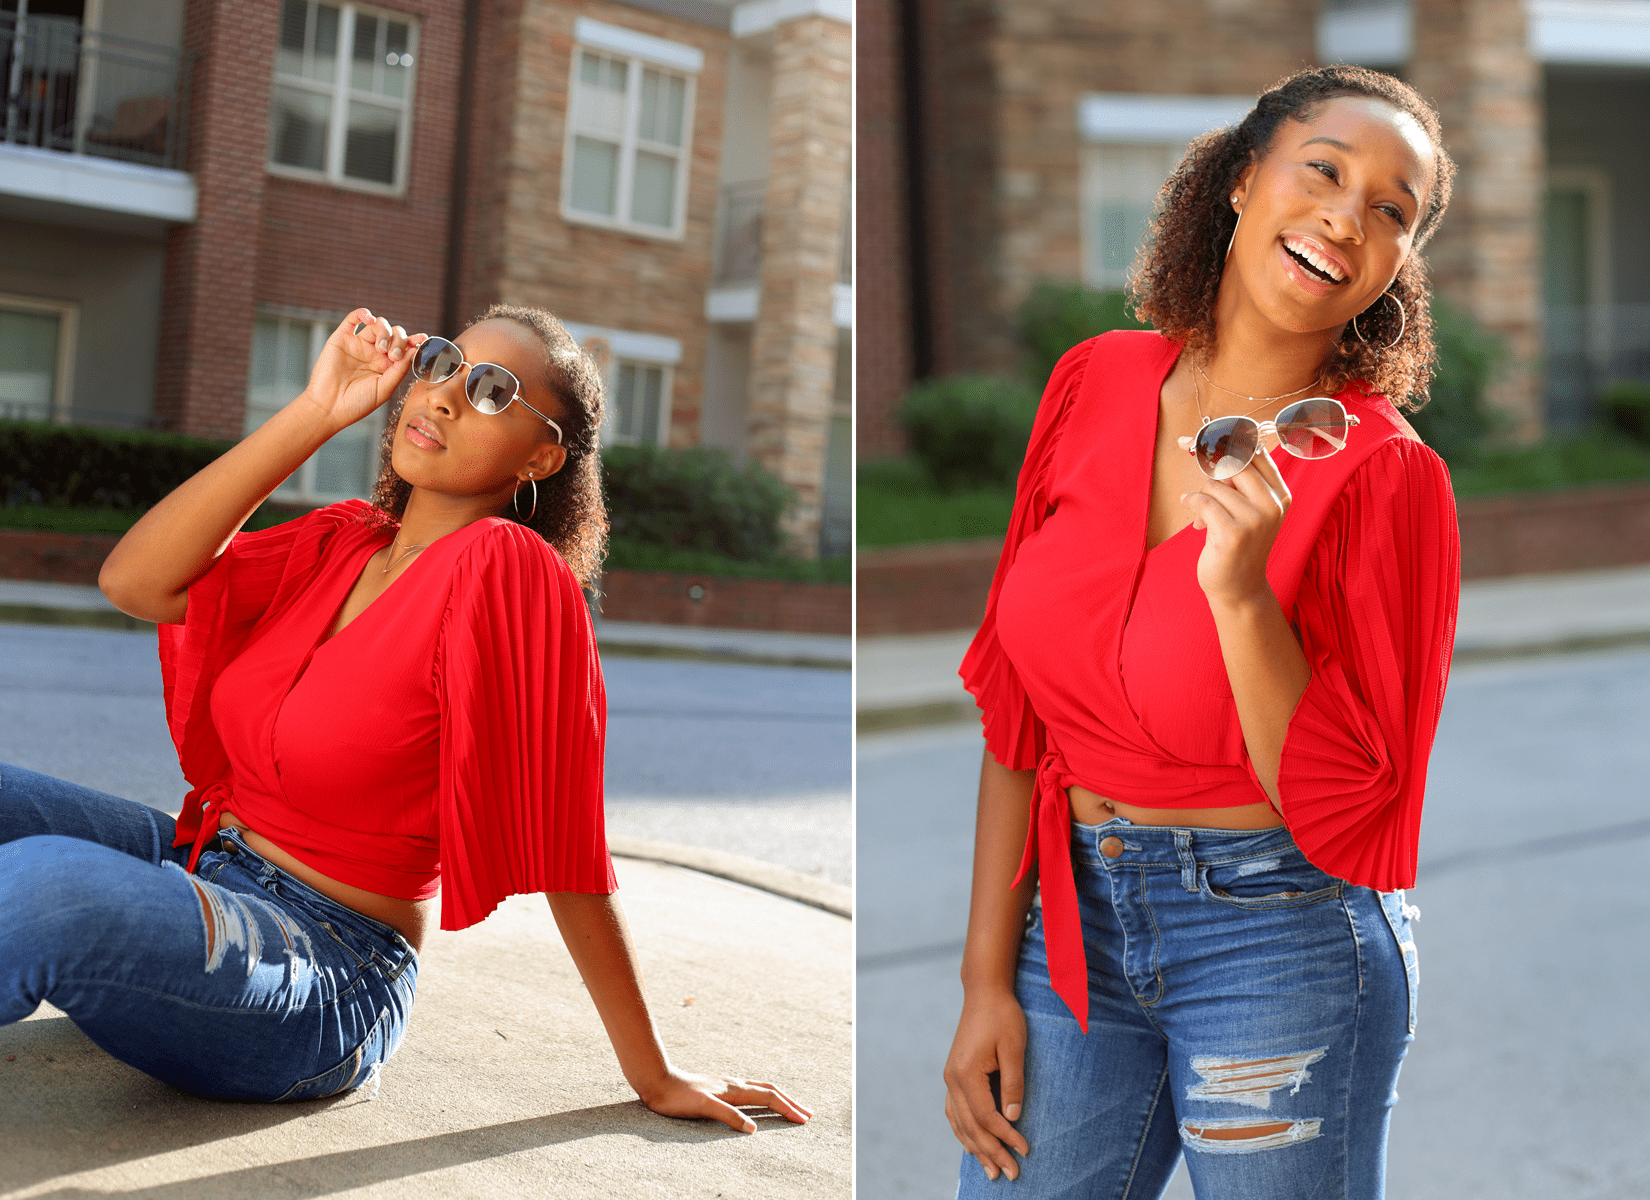 lawrenceville senior photos girl in red with sunglasses